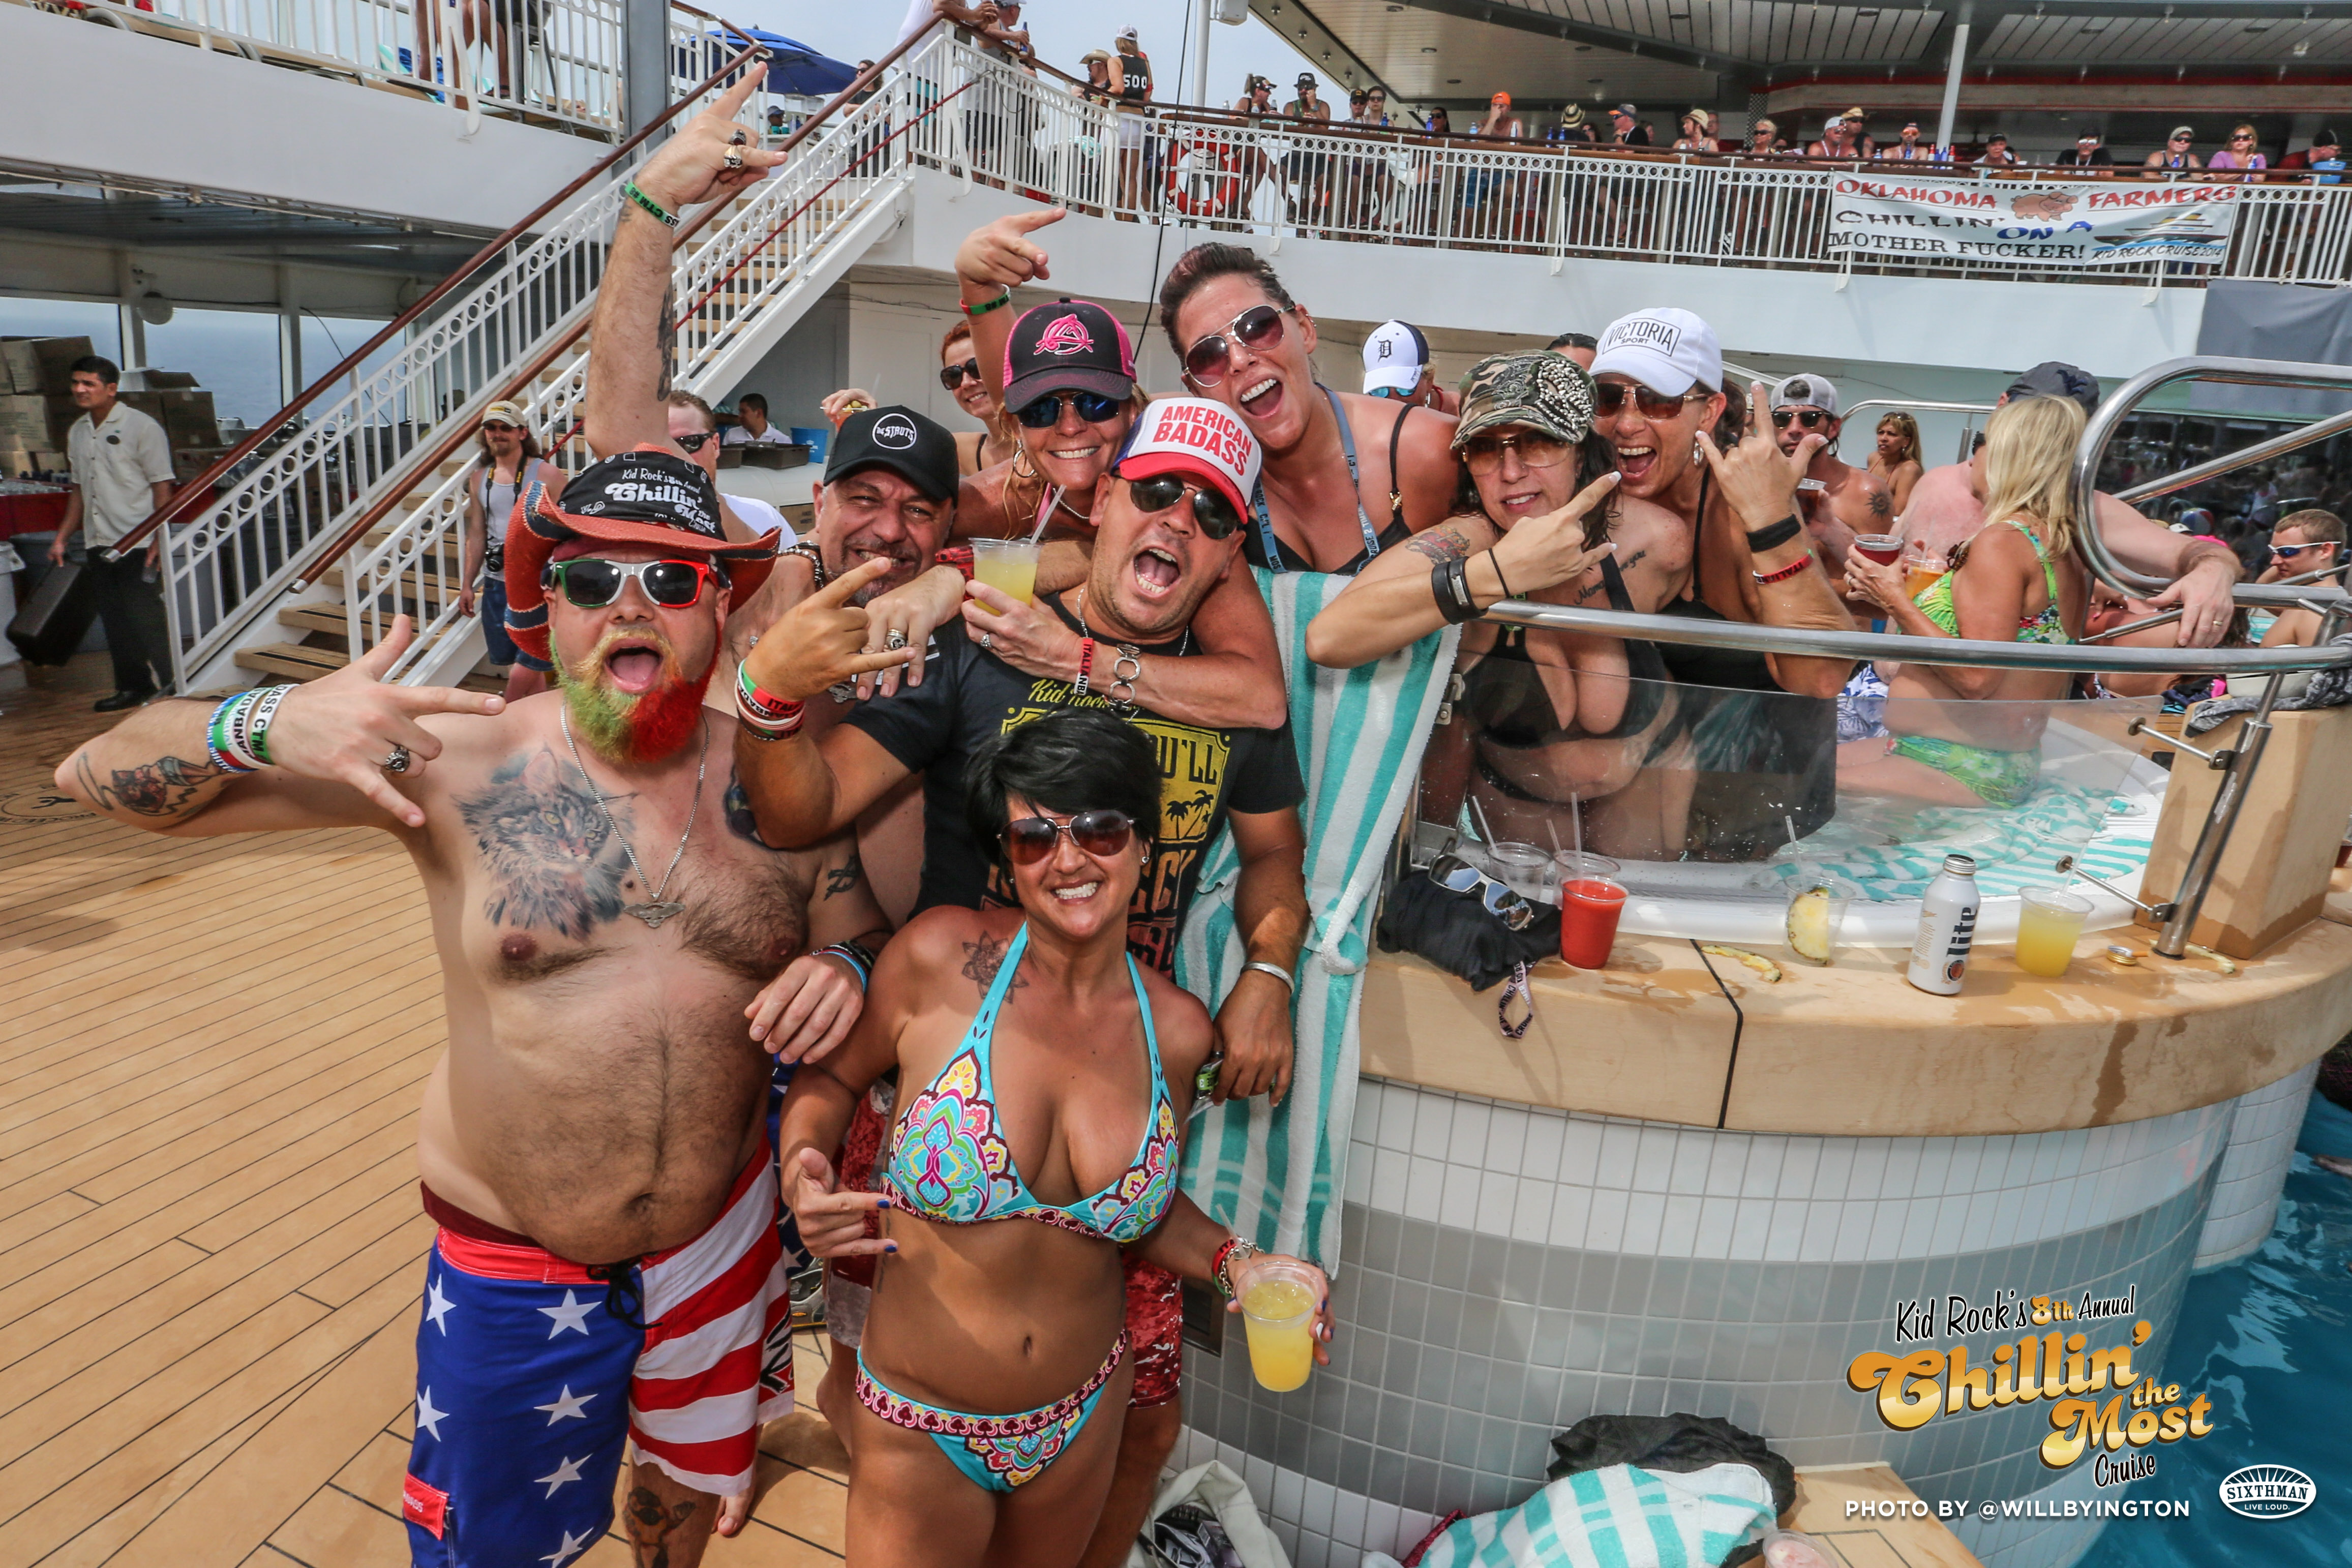 My Liberal Ass Spent 5 Nights on Kid Rocks Chillin the Most Cruise Adult Picture